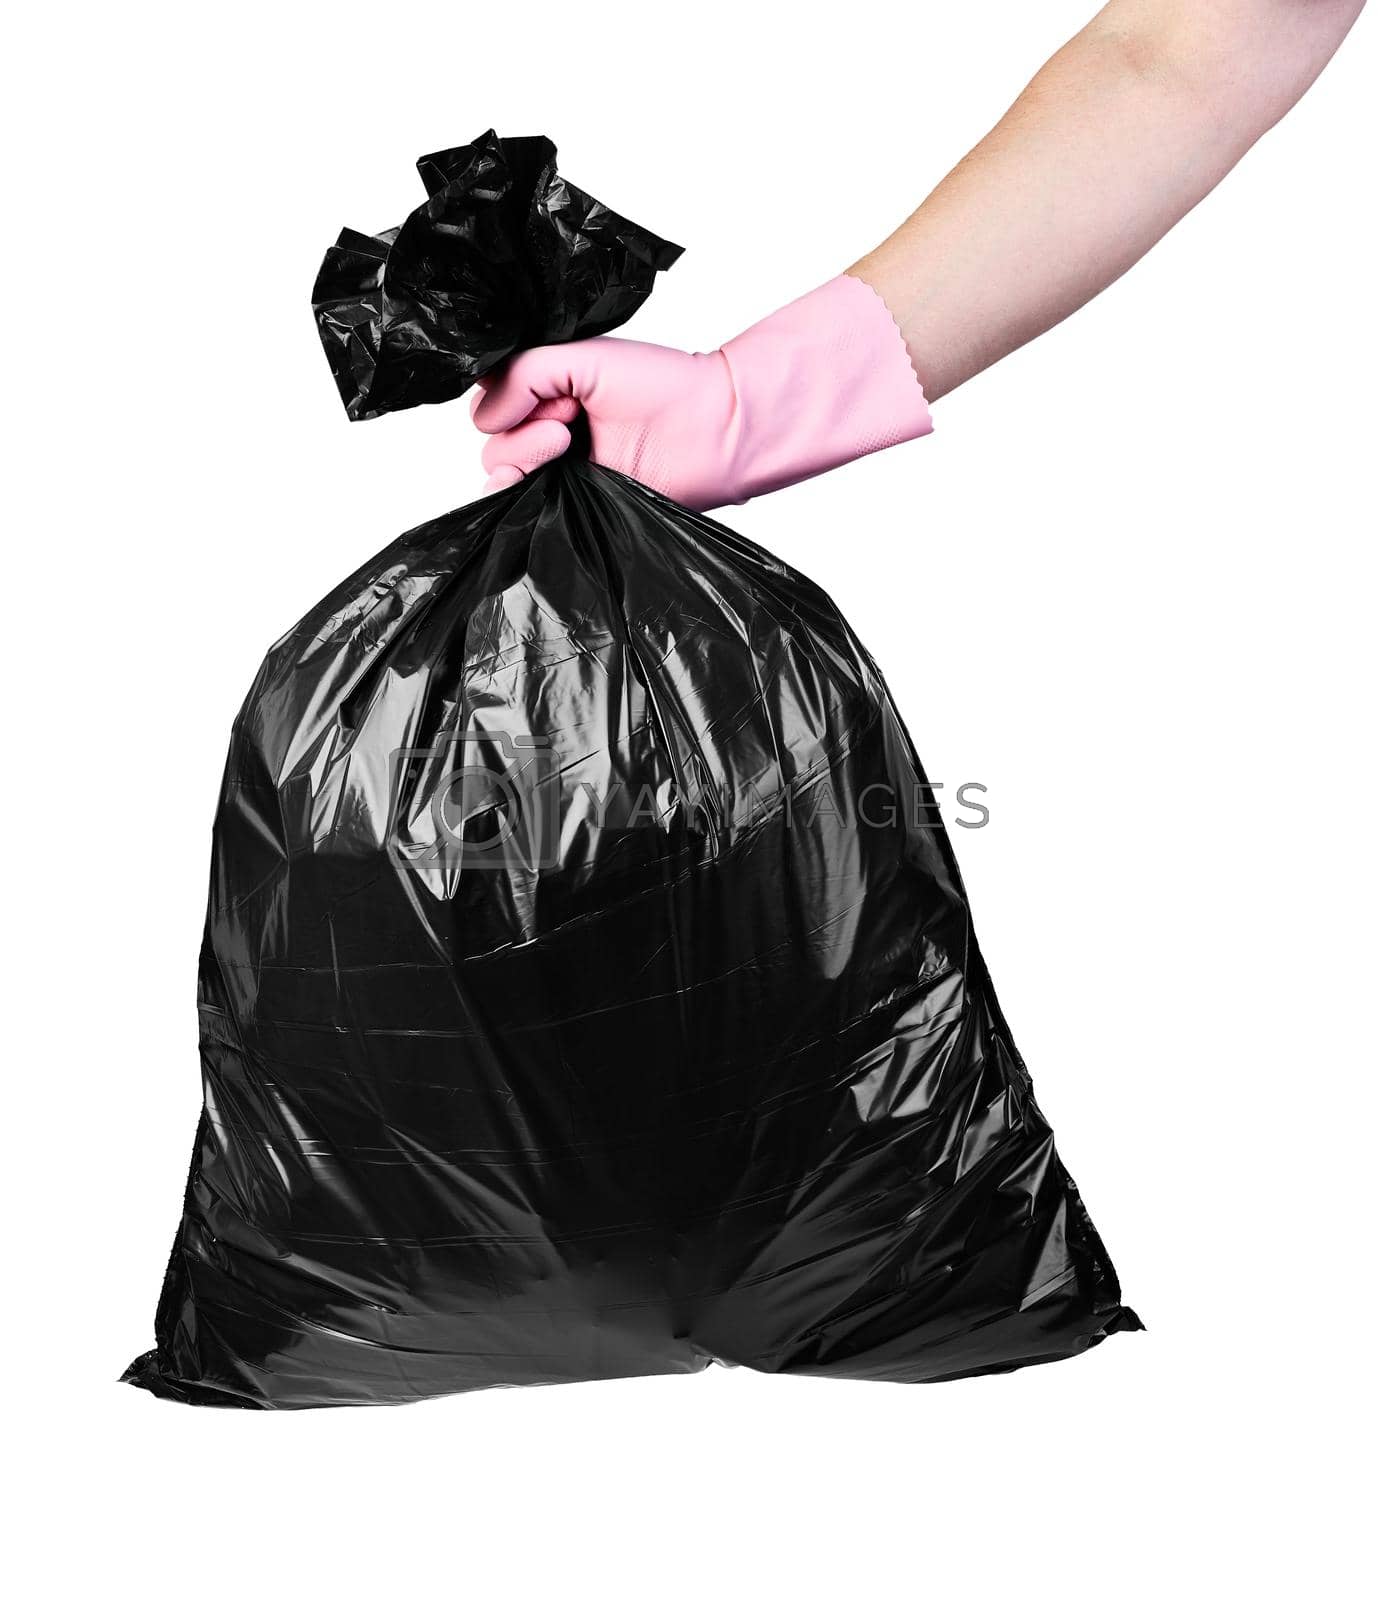 Royalty free image of plastic bag trash waste enviroment garbage pollution hand holding glove protective wear rubbish by Picsfive